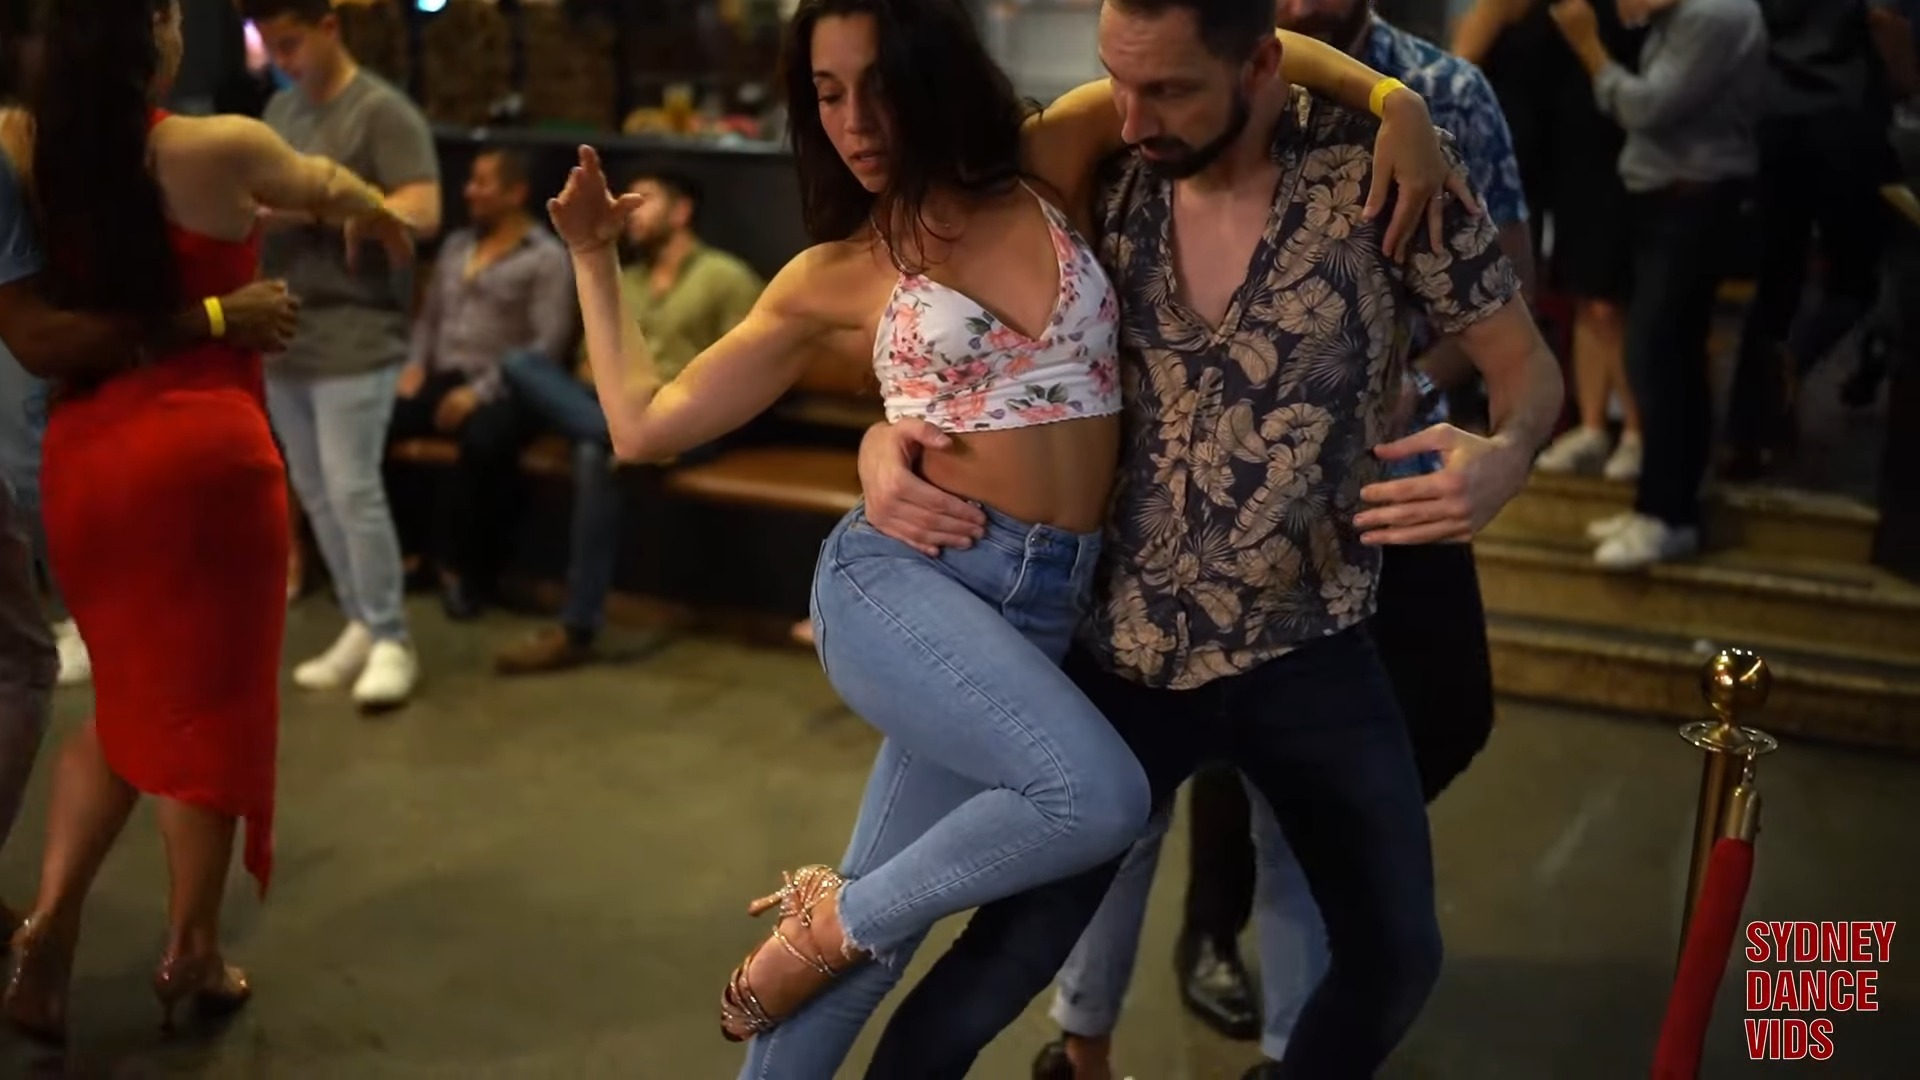 Man and woman dancing together in casual clothes in a club on a social dance event